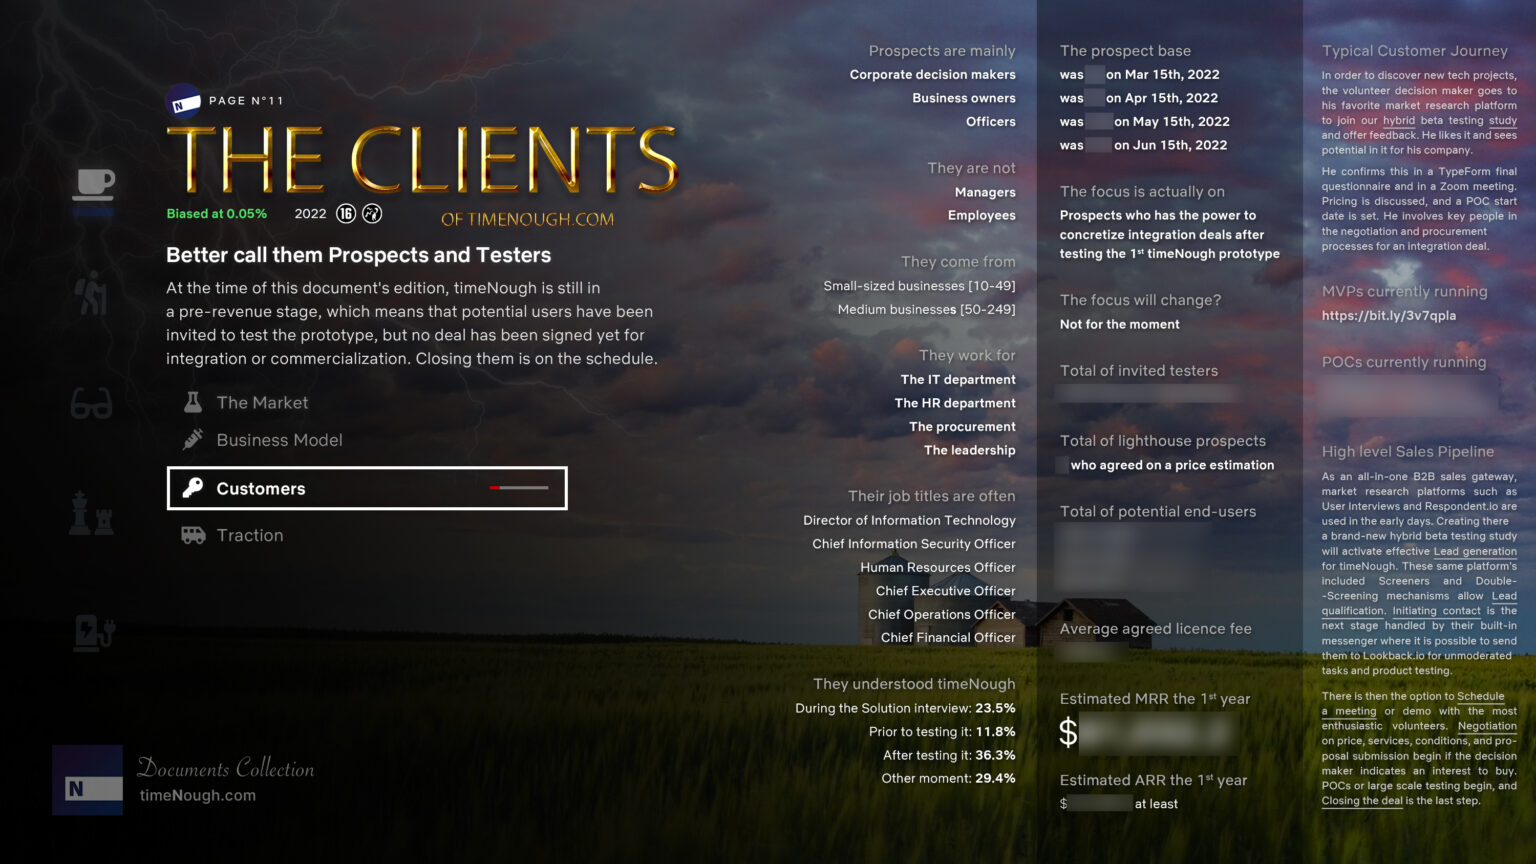 Deck's page number 11, about the clients